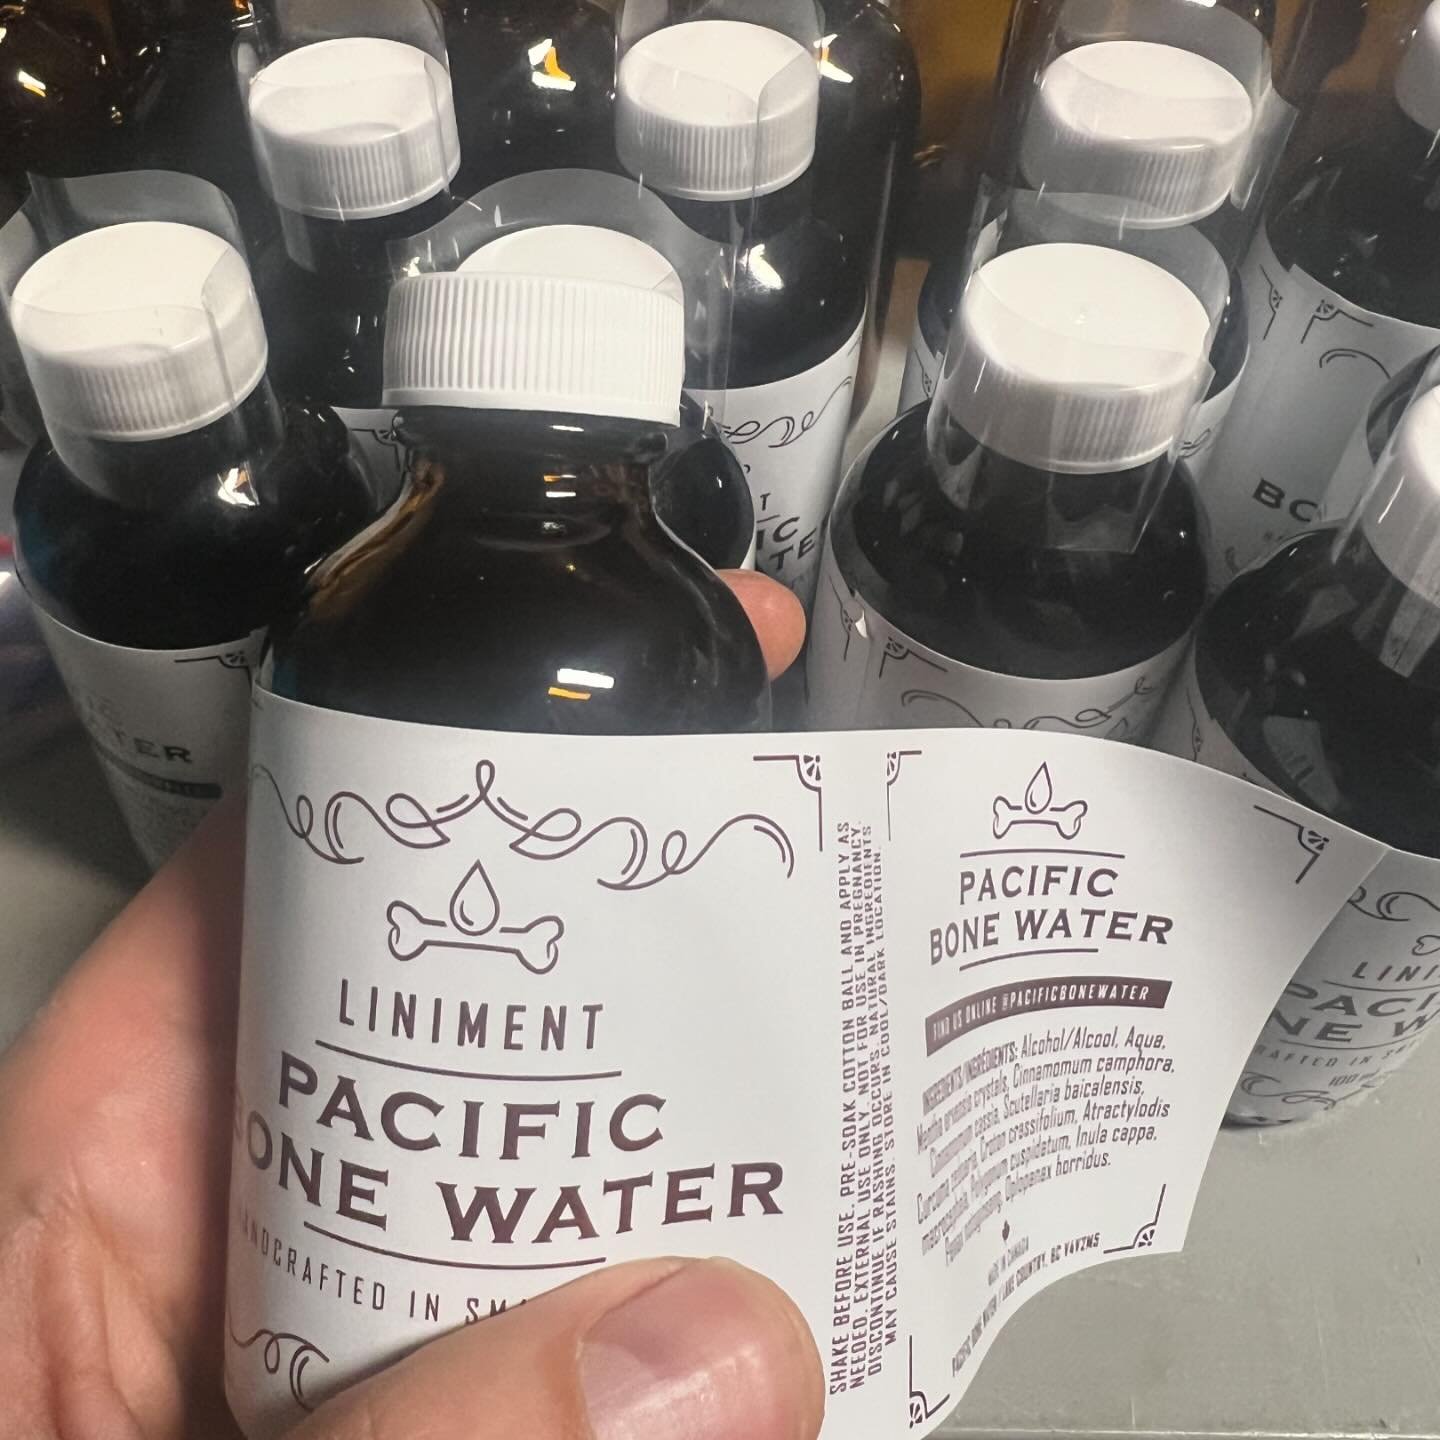 So excited to release the second batch of @pacificbonewater to all the lovely supporters! Everyone who has made a purchase so far has propelled this project forward and allowed for stable production to become a reality.

Please continue to like, shar